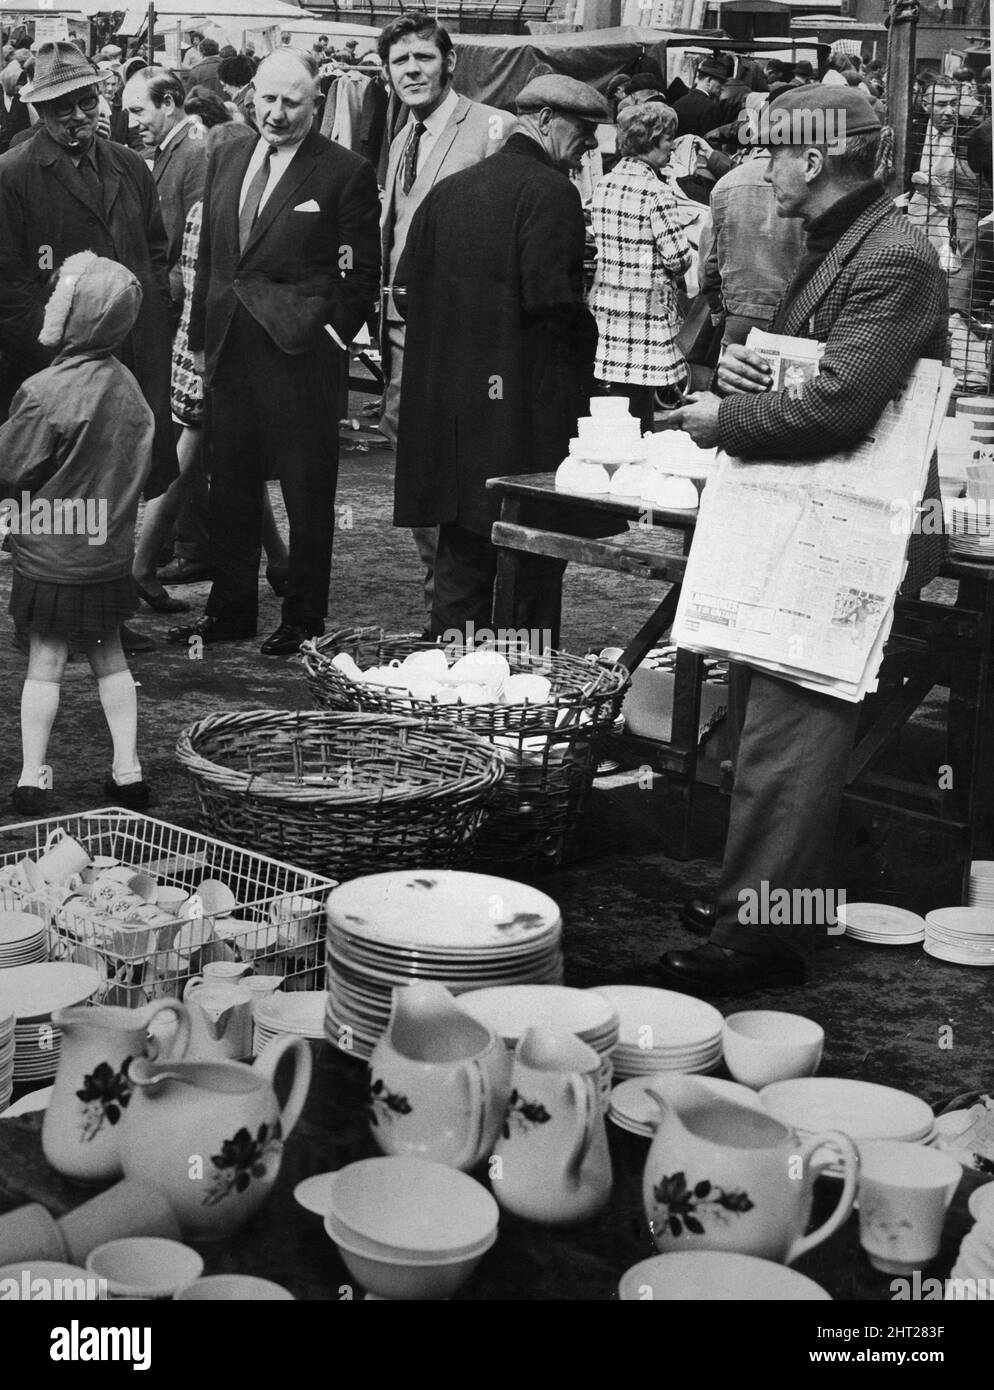 St Martin's Market, Liverpool, 25th April 1966. The Chief Constable, James Haughton, pictured at the market, on his left is Eddie Cartwright. Stock Photo